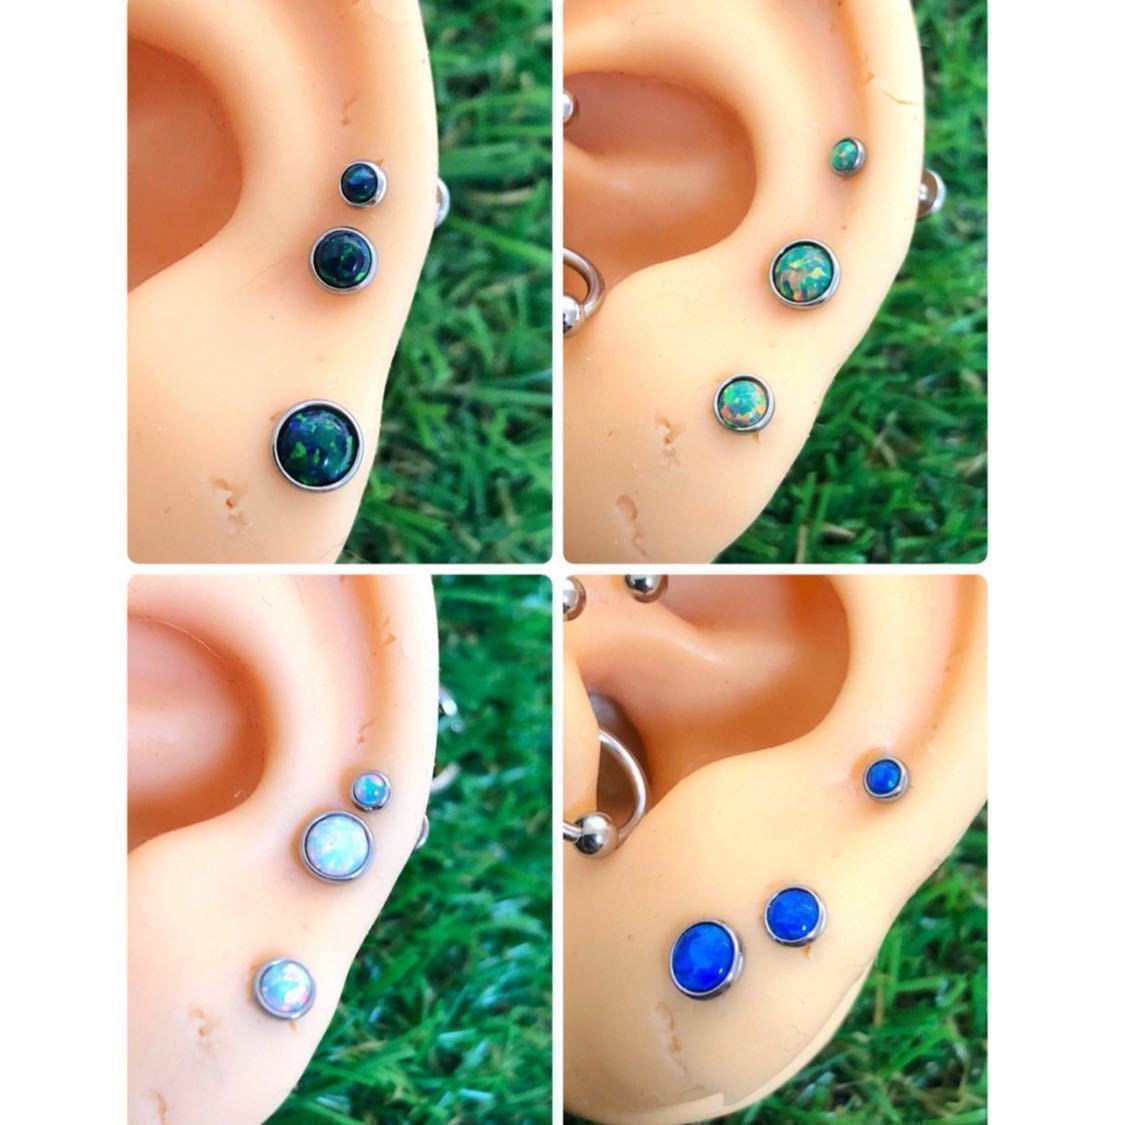 [6×3] body pierce 16G 1 piece la Brett stud .. earrings Synth tik opal tiger gas surgical stainless steel blue [ anonymity delivery ]